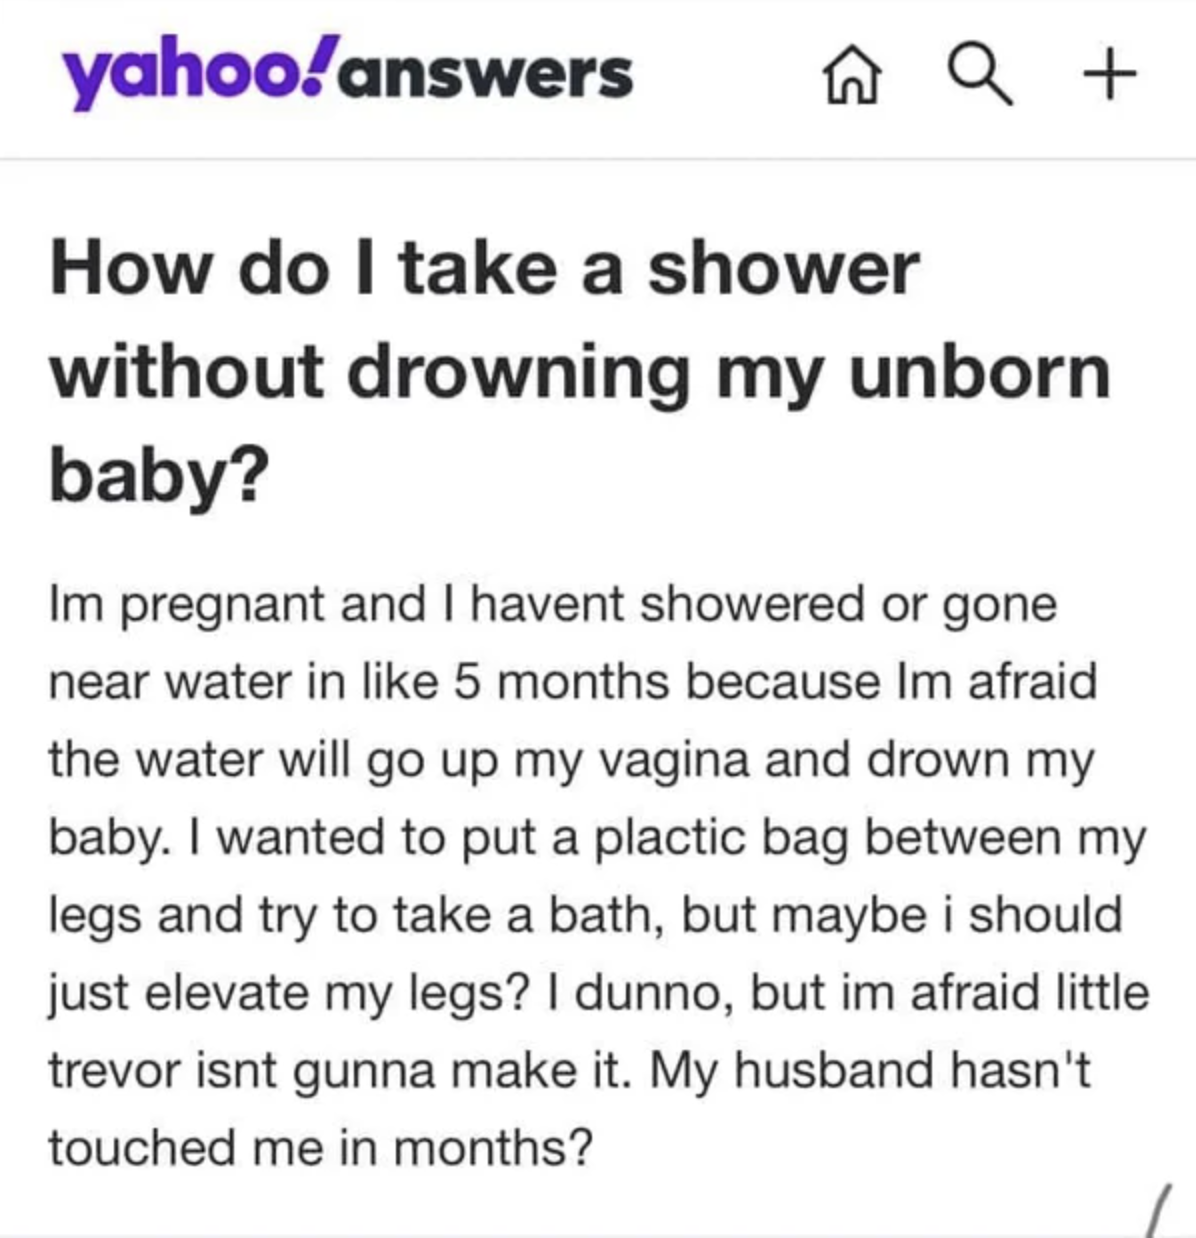 person who is worried showering will drown their unborn baby